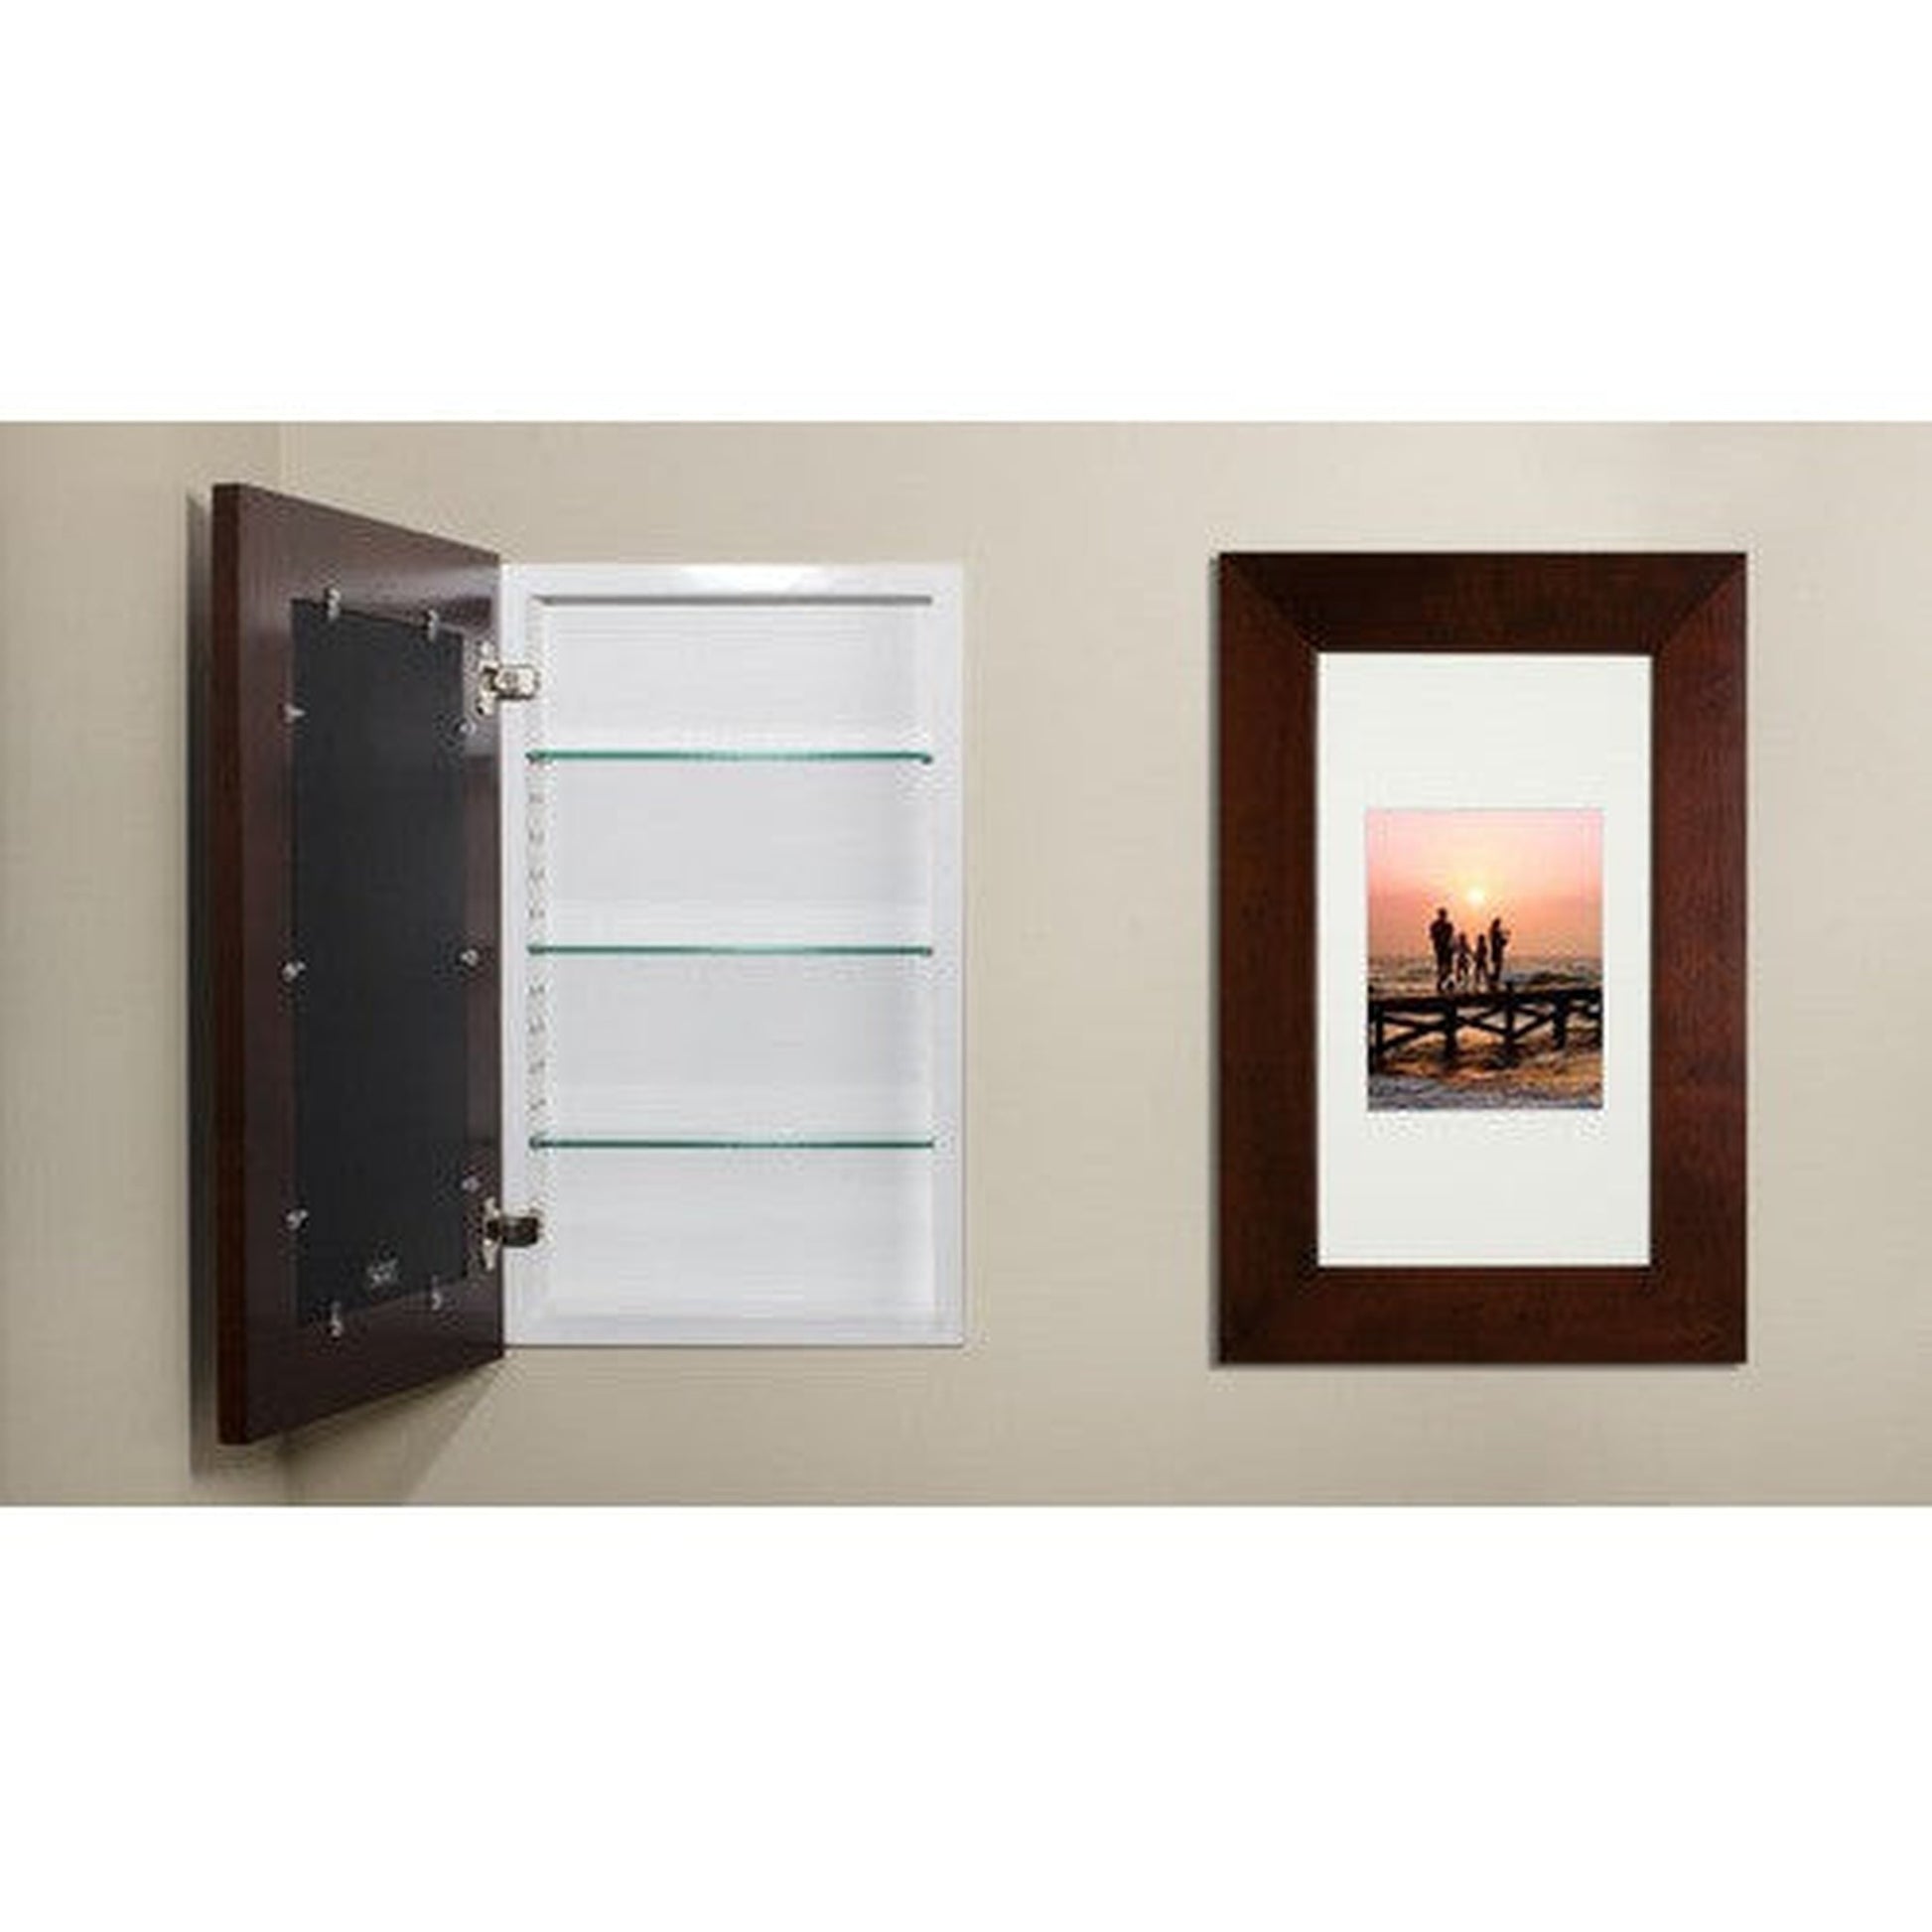 Fox Hollow Furnishings 14" x 24" Espresso Extra Large Special 3" Depth White Interior Recessed Picture Frame Medicine Cabinet